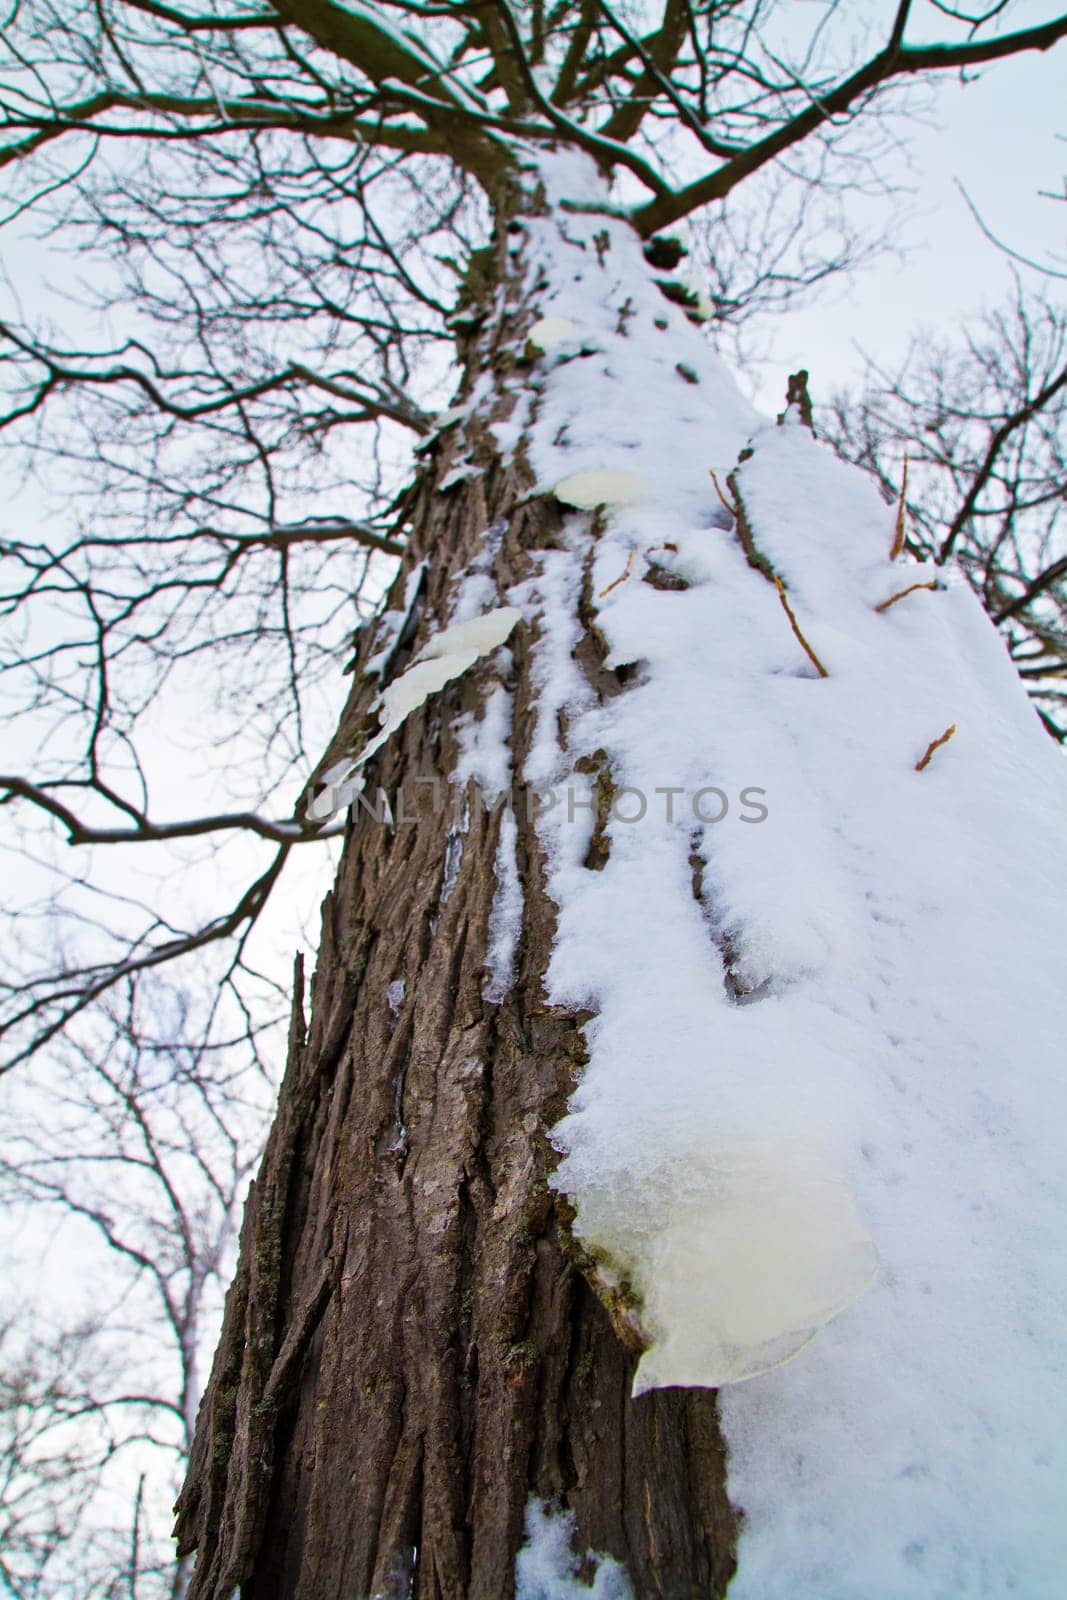 Winter Majesty: Snow-Covered Tree Trunk Perspective in Fort Wayne, Indiana by njproductions